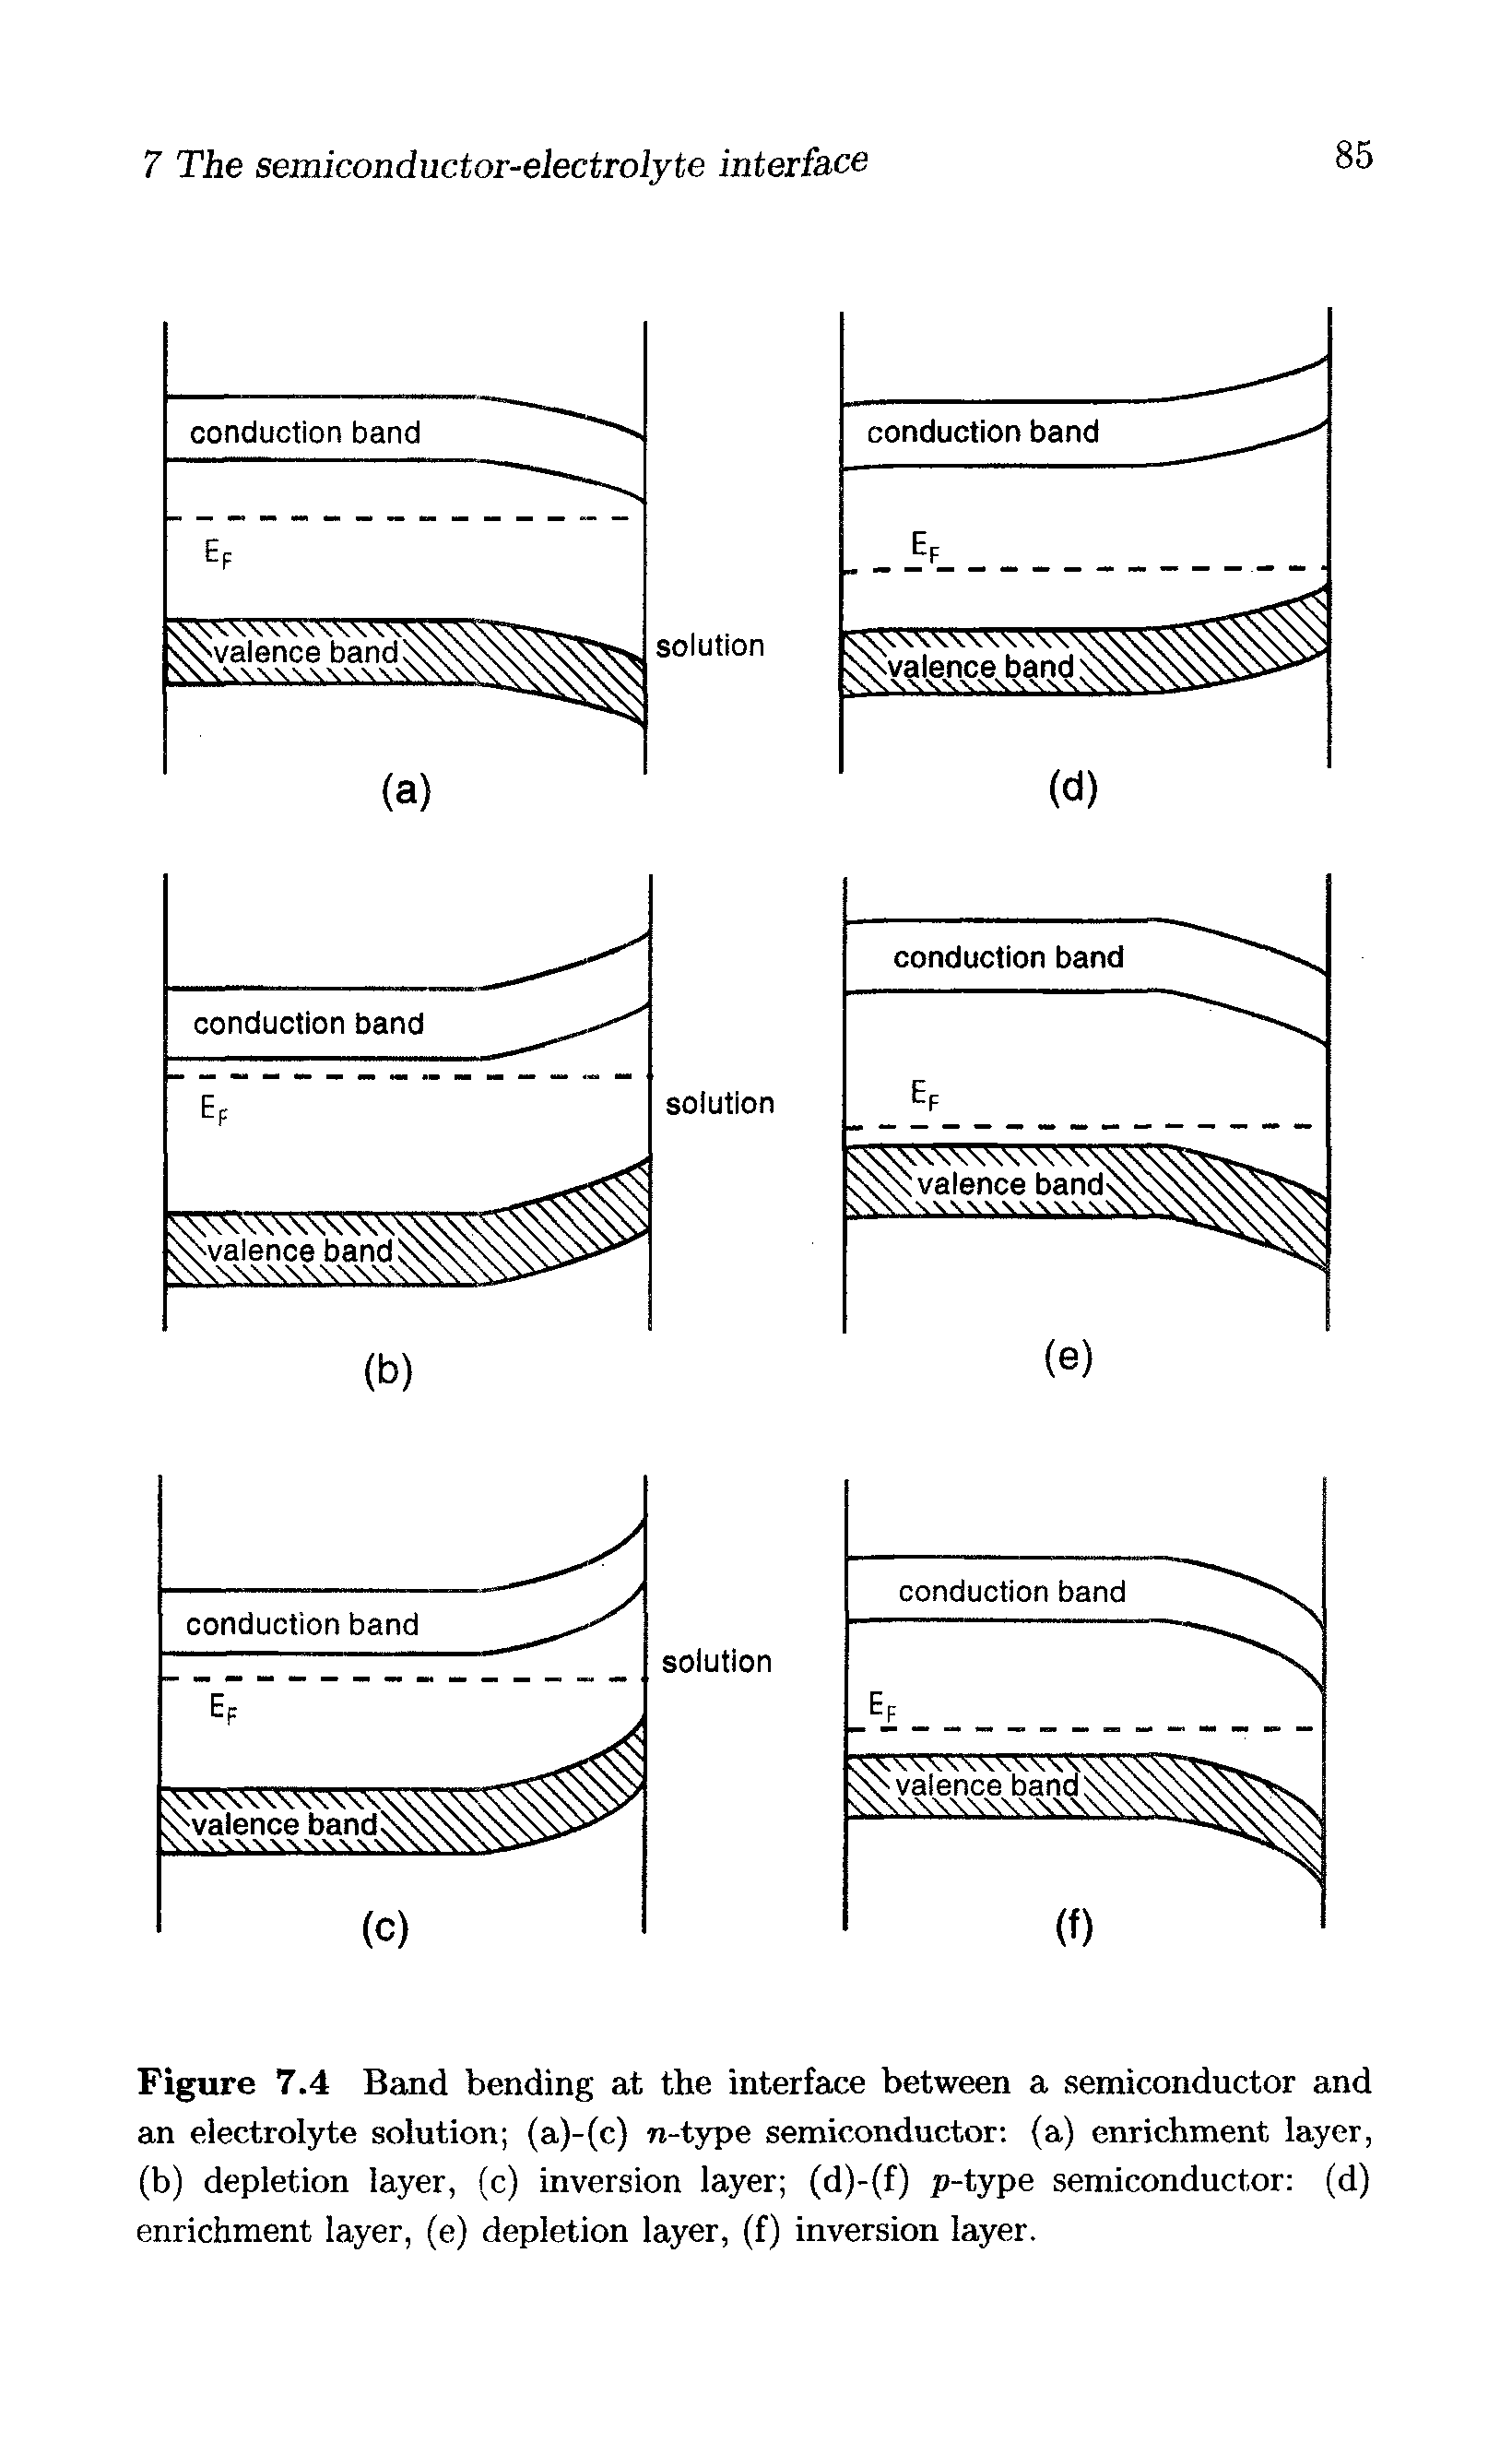 Figure 7.4 Band bending at the interface between a semiconductor and an electrolyte solution (a)-(c) n-type semiconductor (a) enrichment layer, (b) depletion layer, (c) inversion layer (d)-(f) p-t.ype semiconductor (d) enrichment layer, (e) depletion layer, (f) inversion layer.